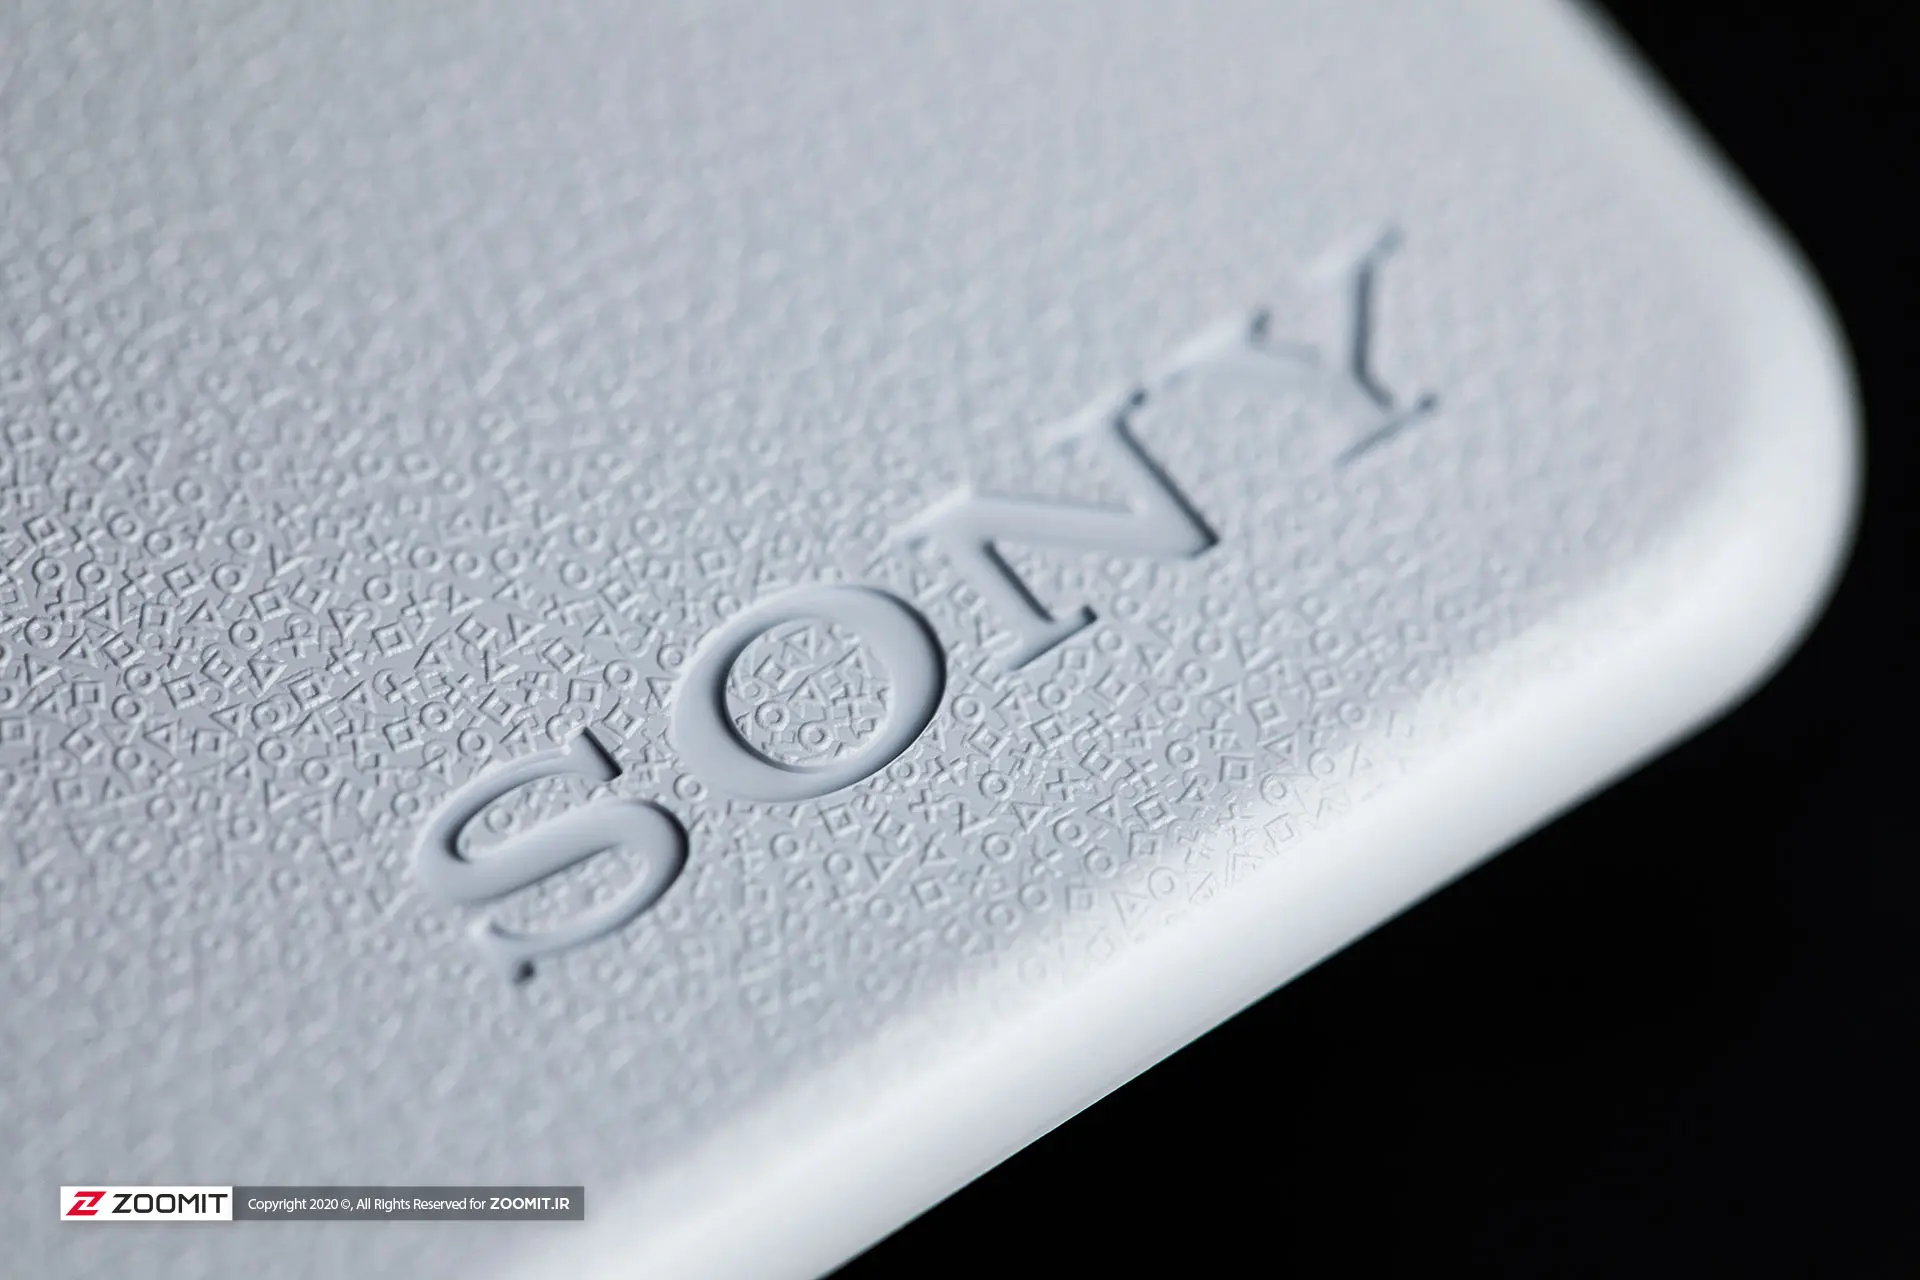 Sony Brand Story; From The Production Of Rice Cookers To Becoming One Of The Most Famous Companies In The World